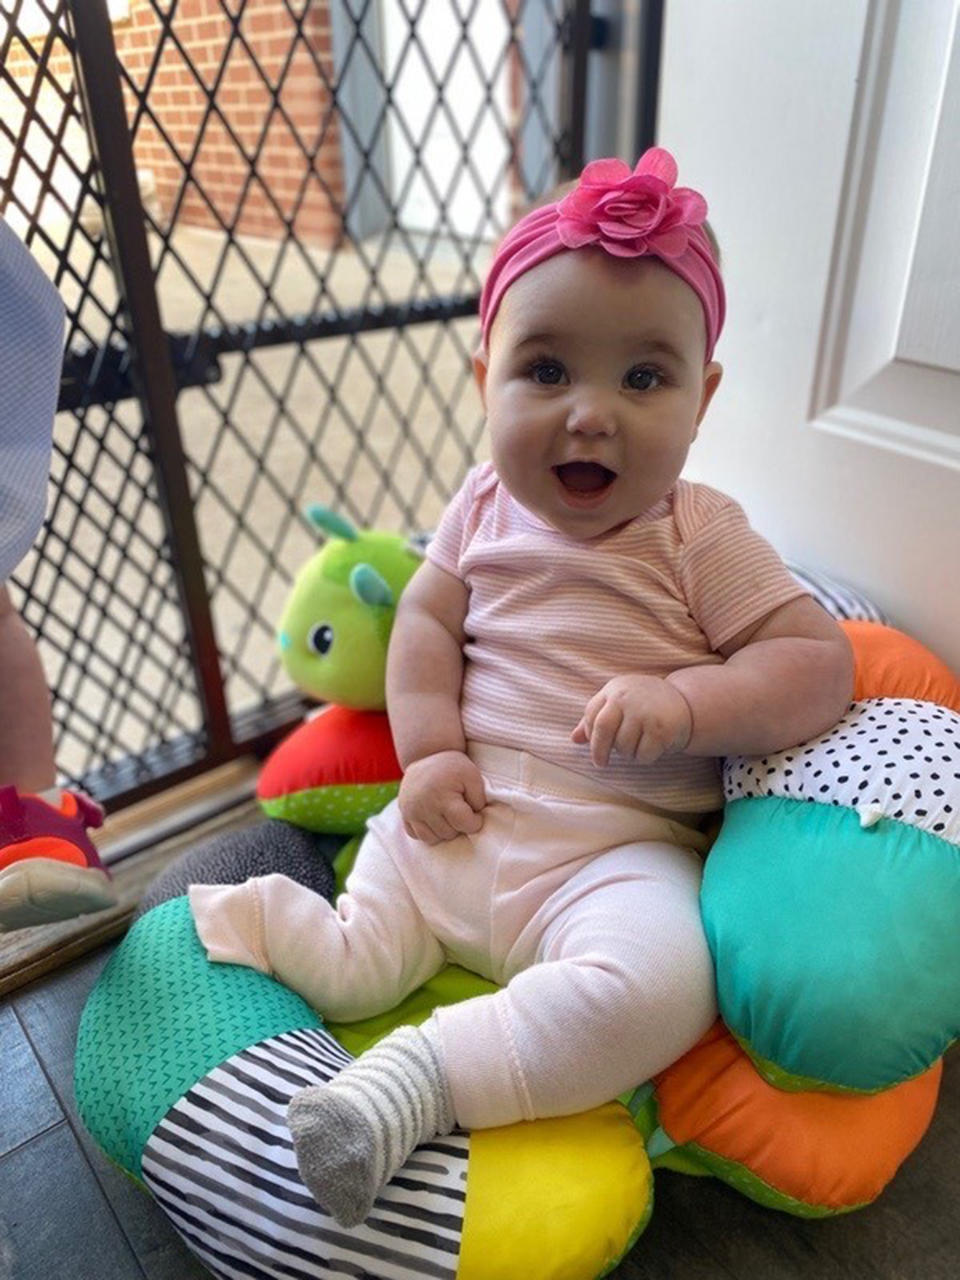 At her 18 week appointment, Meredith learned her daughter would be born without a femur or a fibula. (Courtesy Gerber / Slish Family)